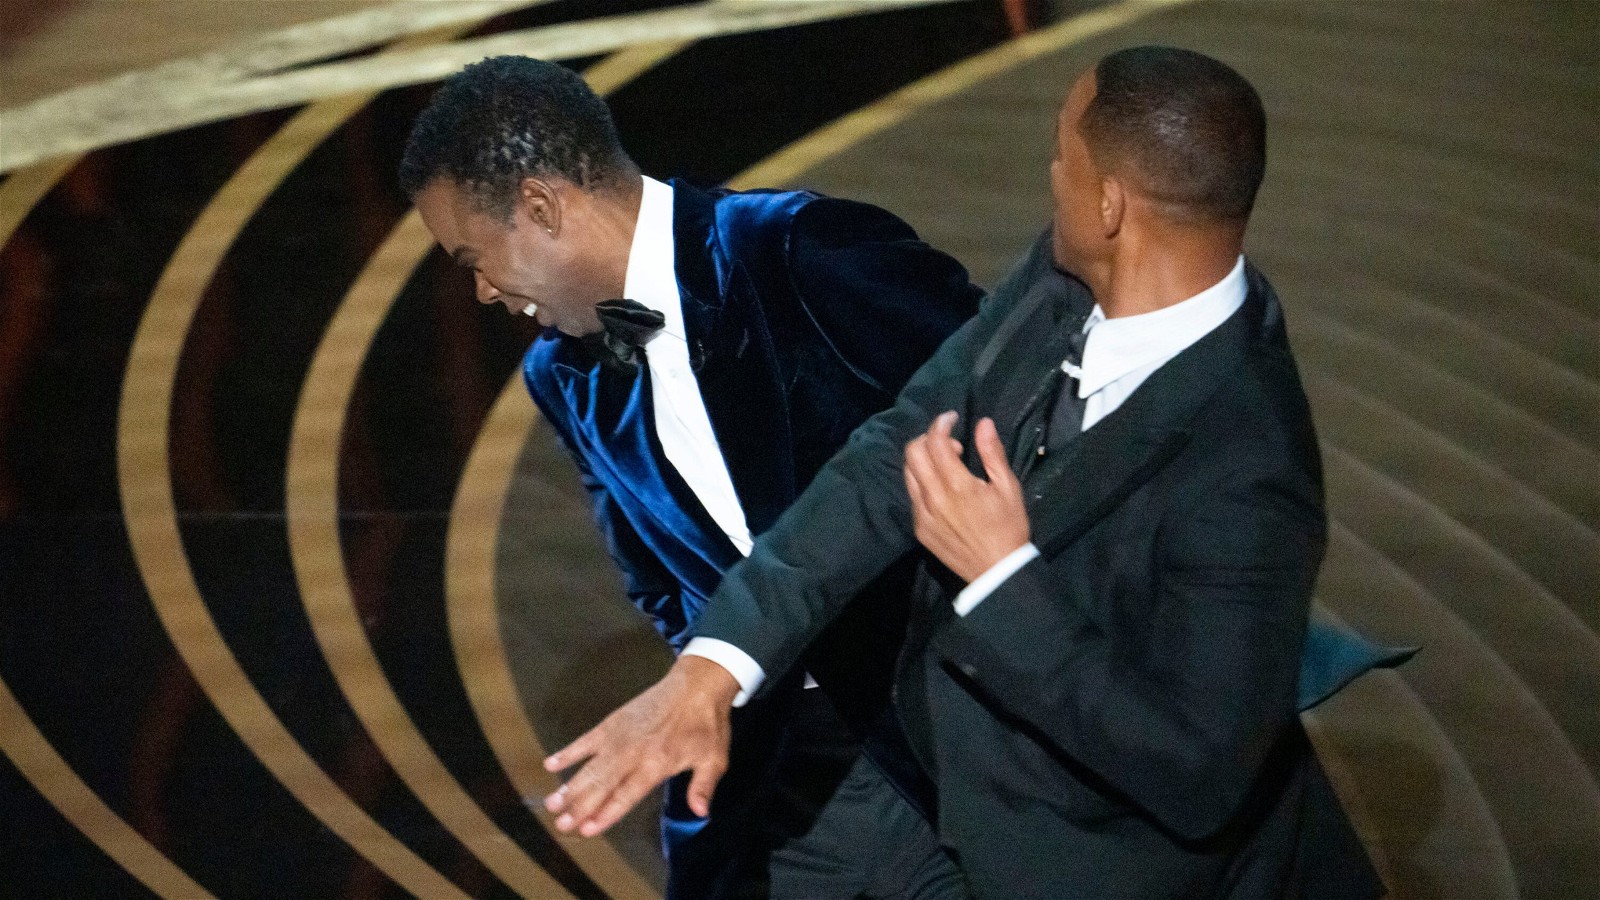 Will Smith slaps Chris Rock at the 2022 Academy Awards